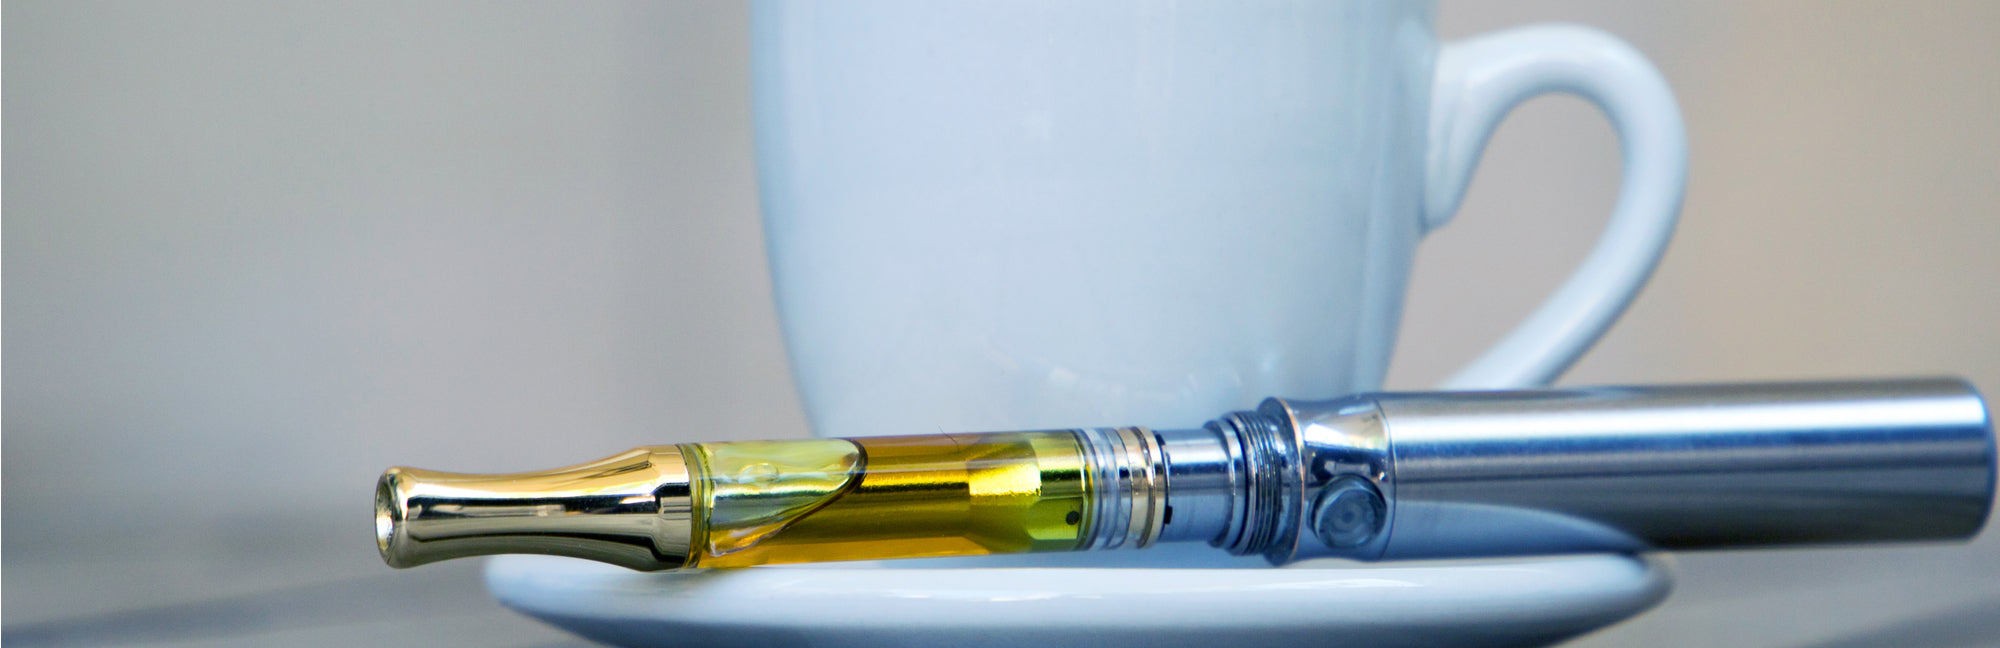 Vaping Concentrates: All You Need to Know About Vaping Dabs - Yo